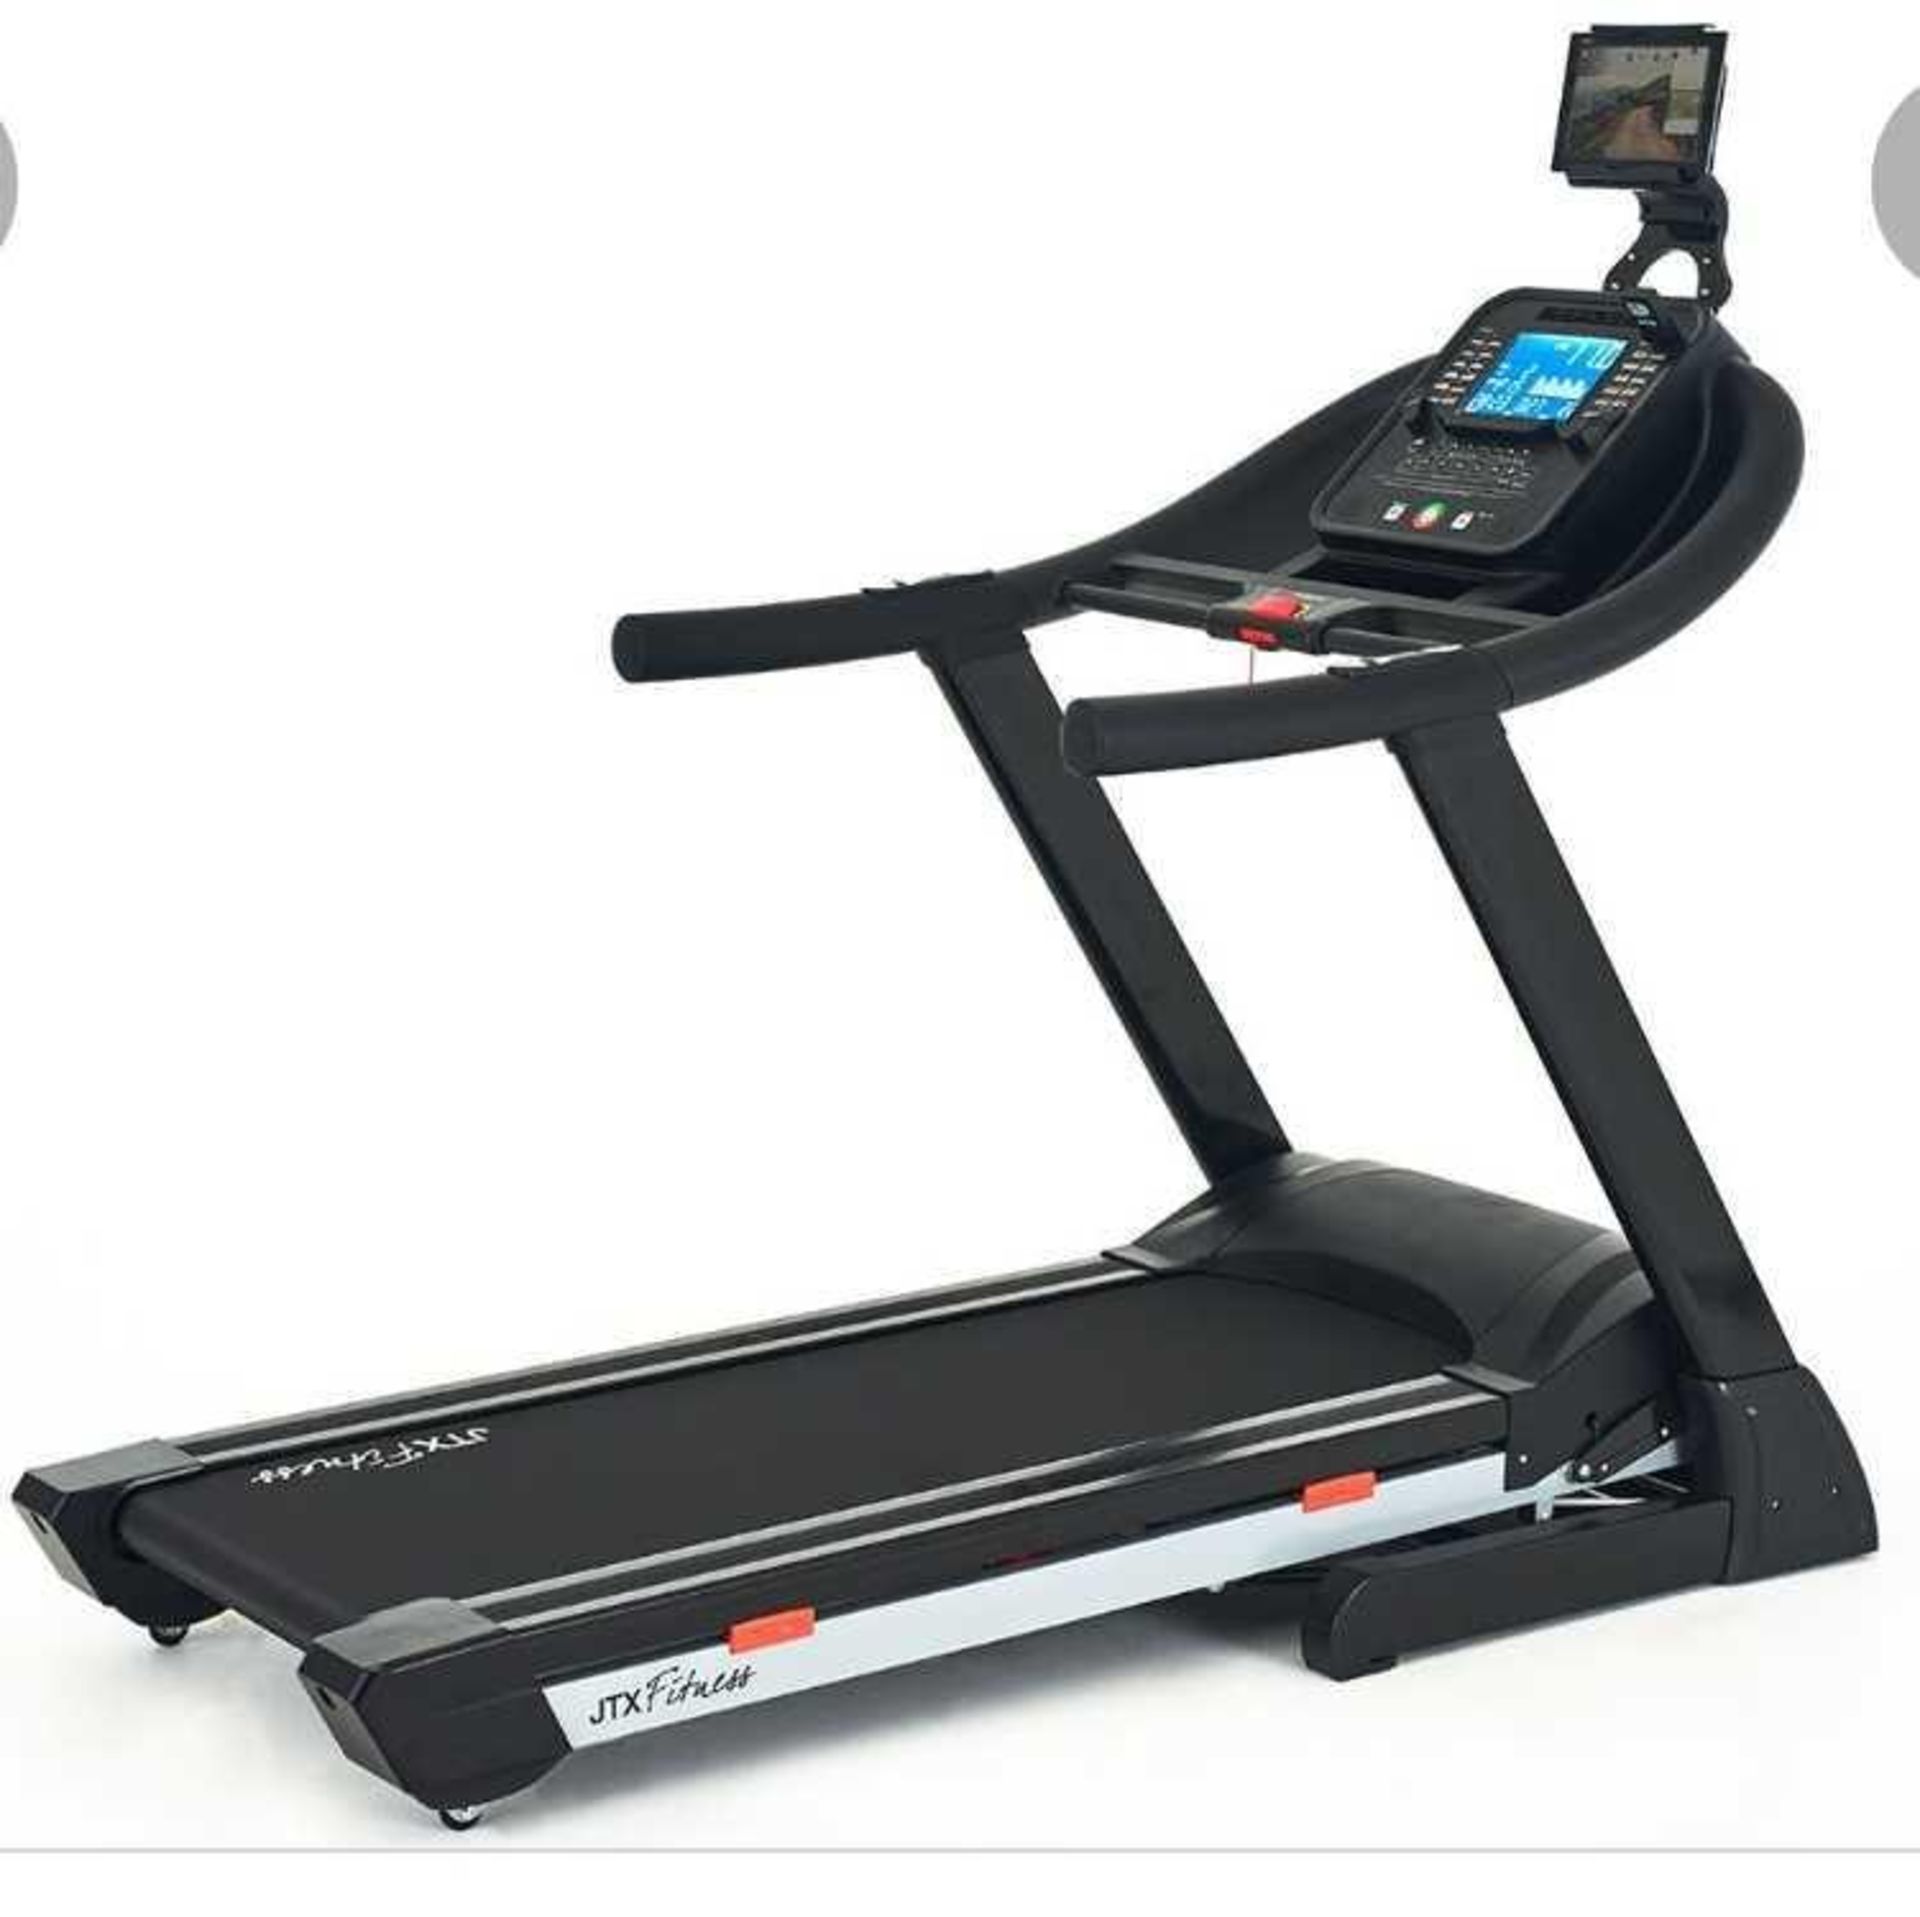 RRP £1550 Jtx Fitness Sprint 9 Commercial Foldable Treadmill (P) - Image 2 of 4